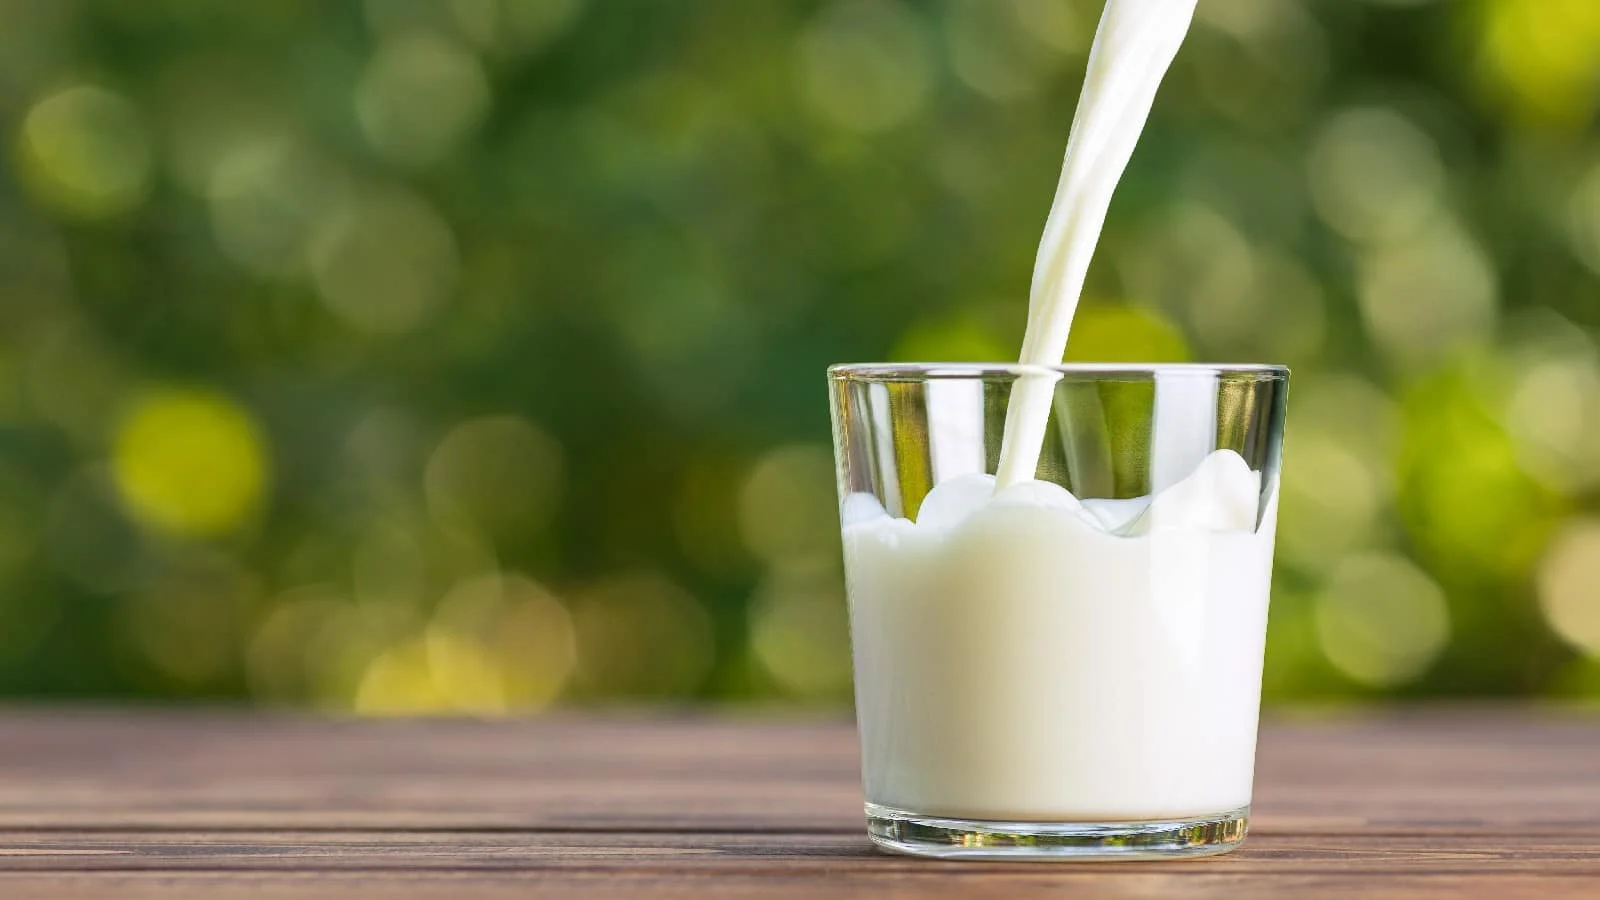 Avoid giving these milk combinations